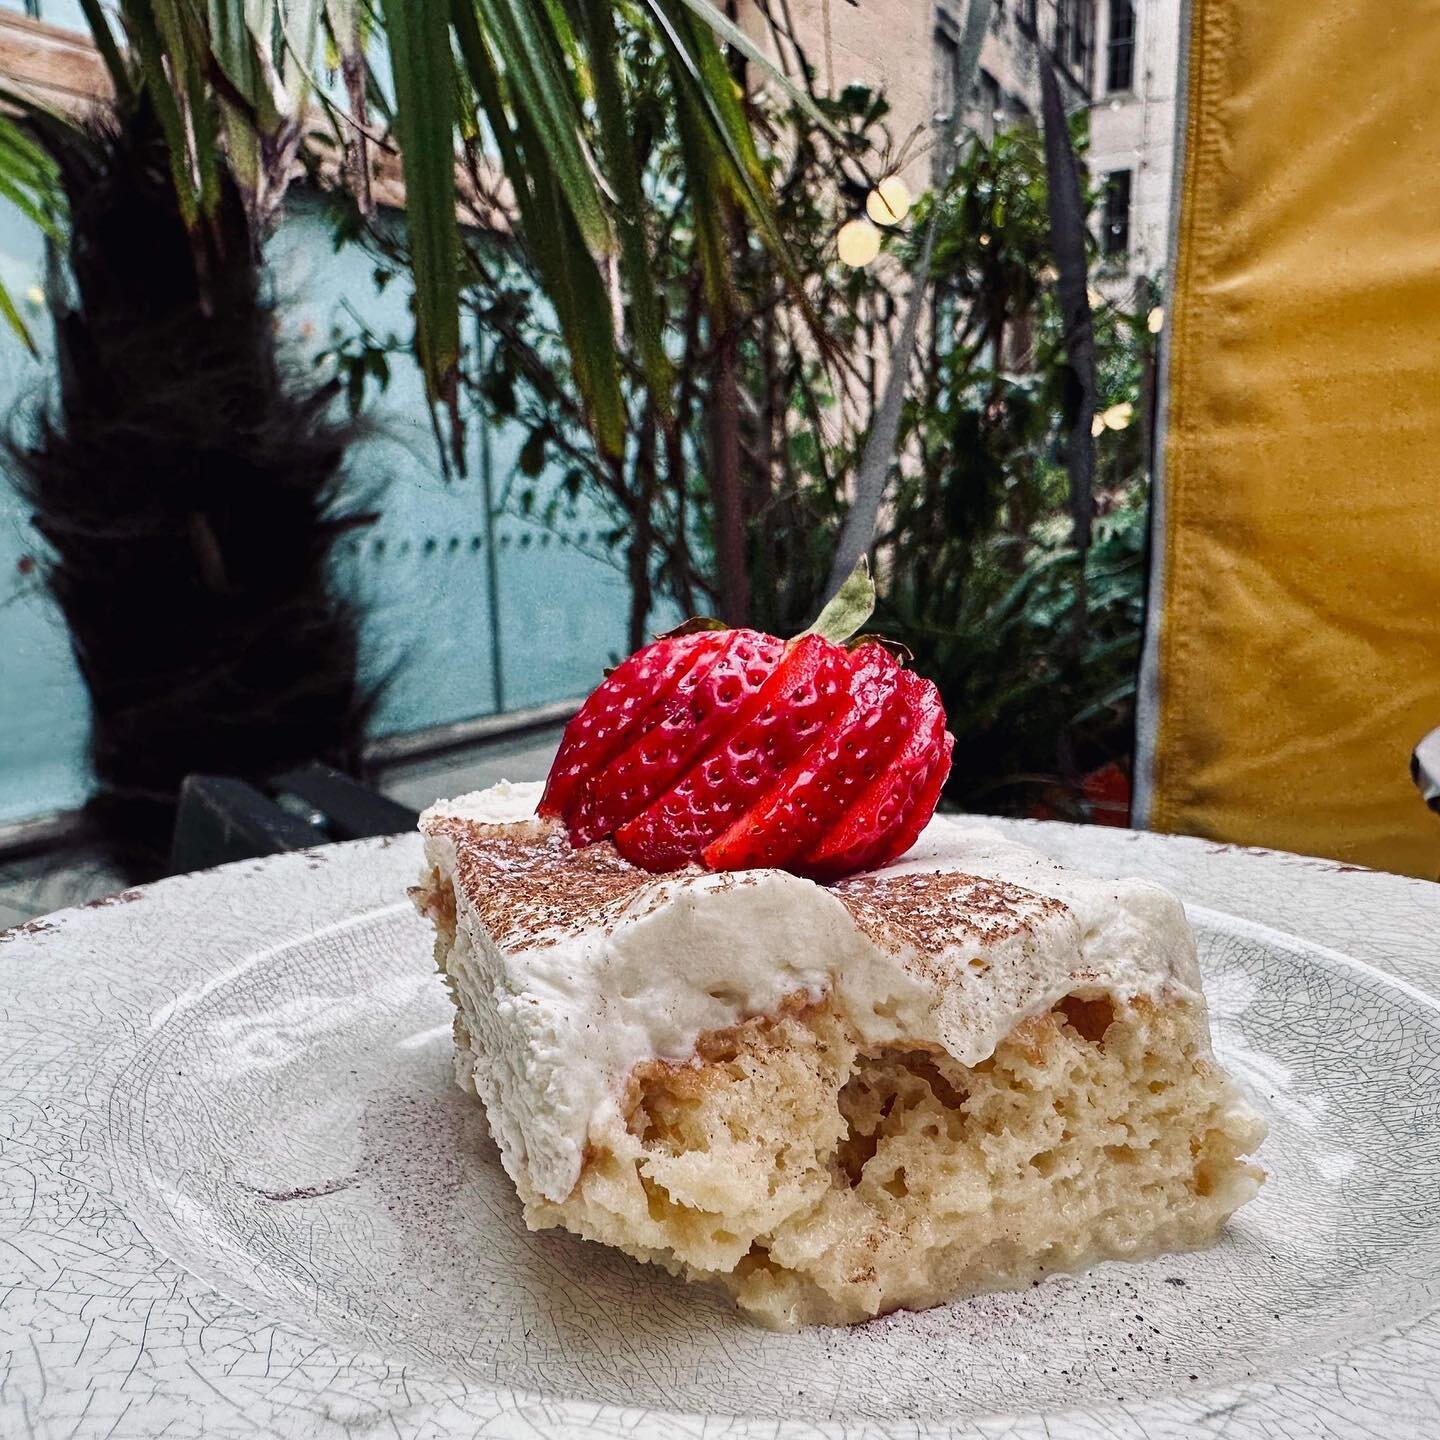 You&rsquo;re all tr&egrave;s lucky because this weekend we&rsquo;re serving up Tres Leche. For those who don&rsquo;t know, Tres Leche is a sponge cake soaked in 3 kinds of milk. It&rsquo;s absolutely delicious and the perfect treat for the weekend 🥛